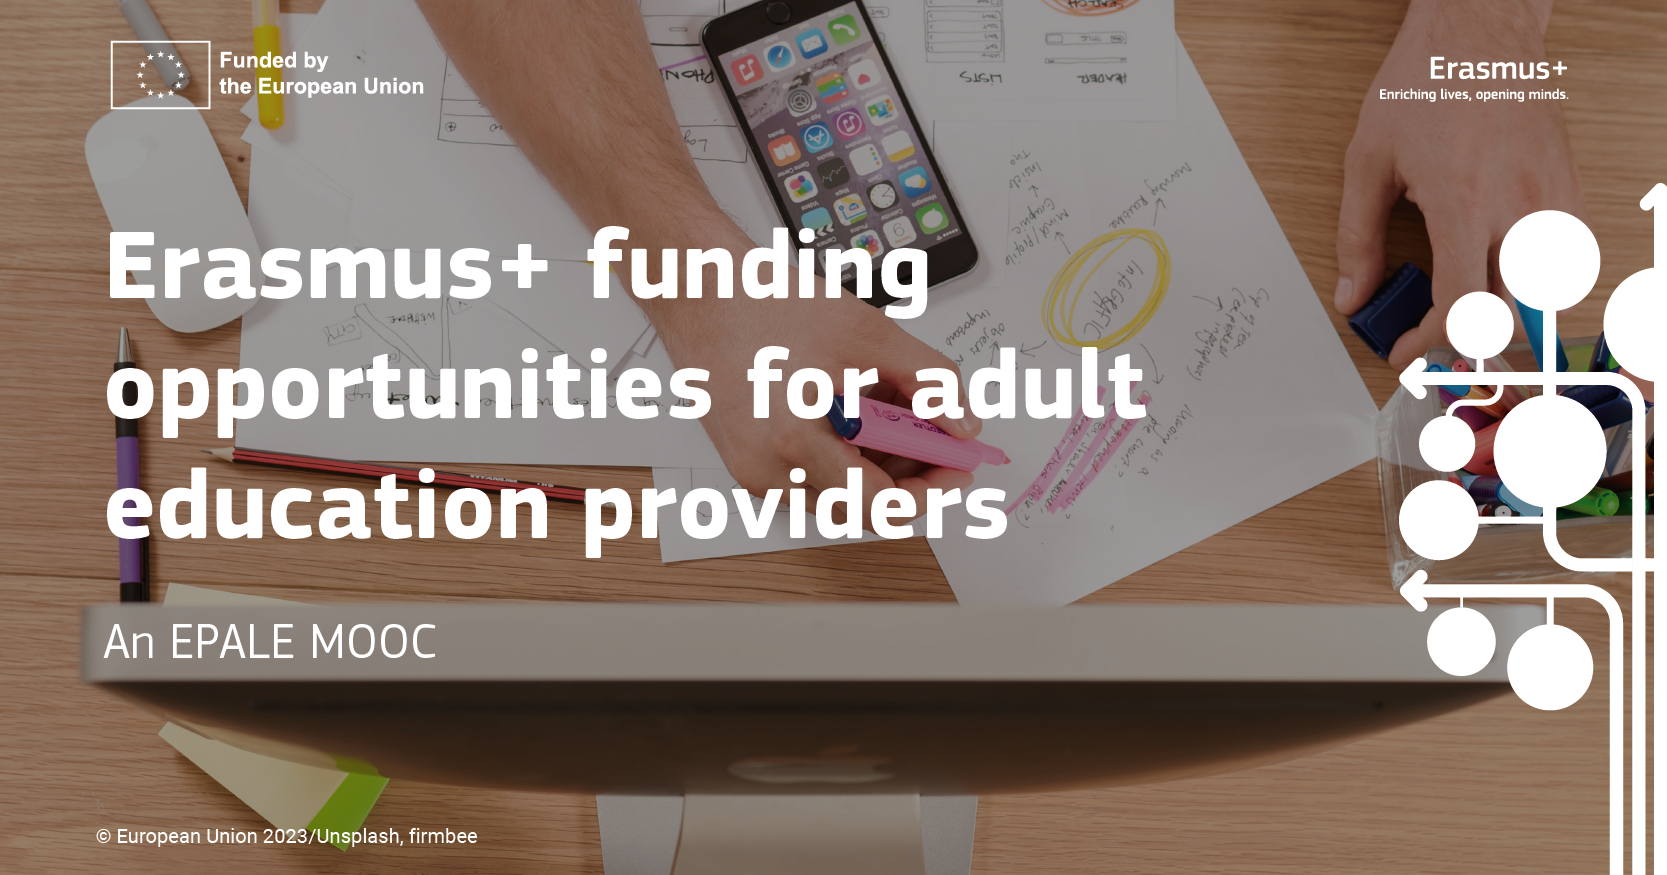 Erasmus+ funding opportunities for adult education providers